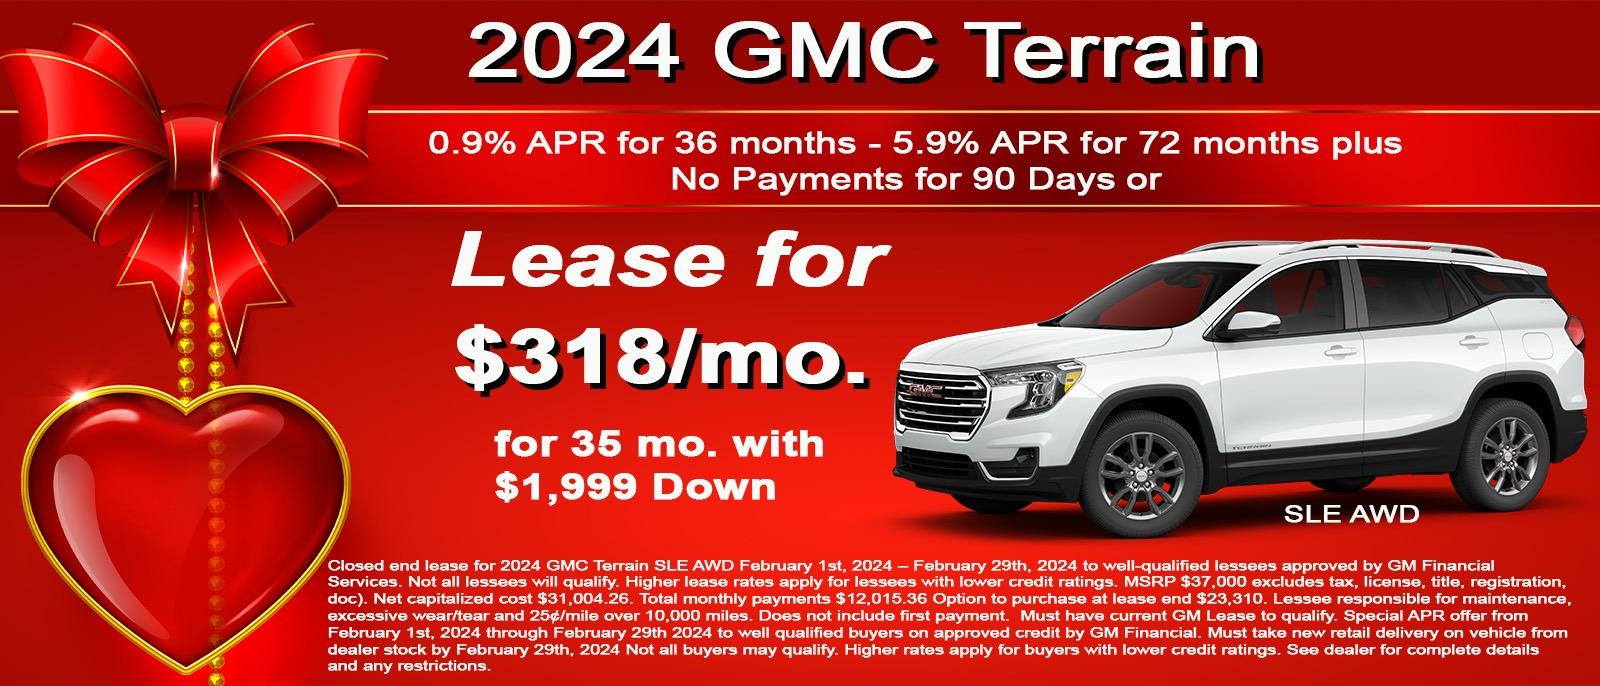 Get your new 2024 GMC Terrain for only $318 month